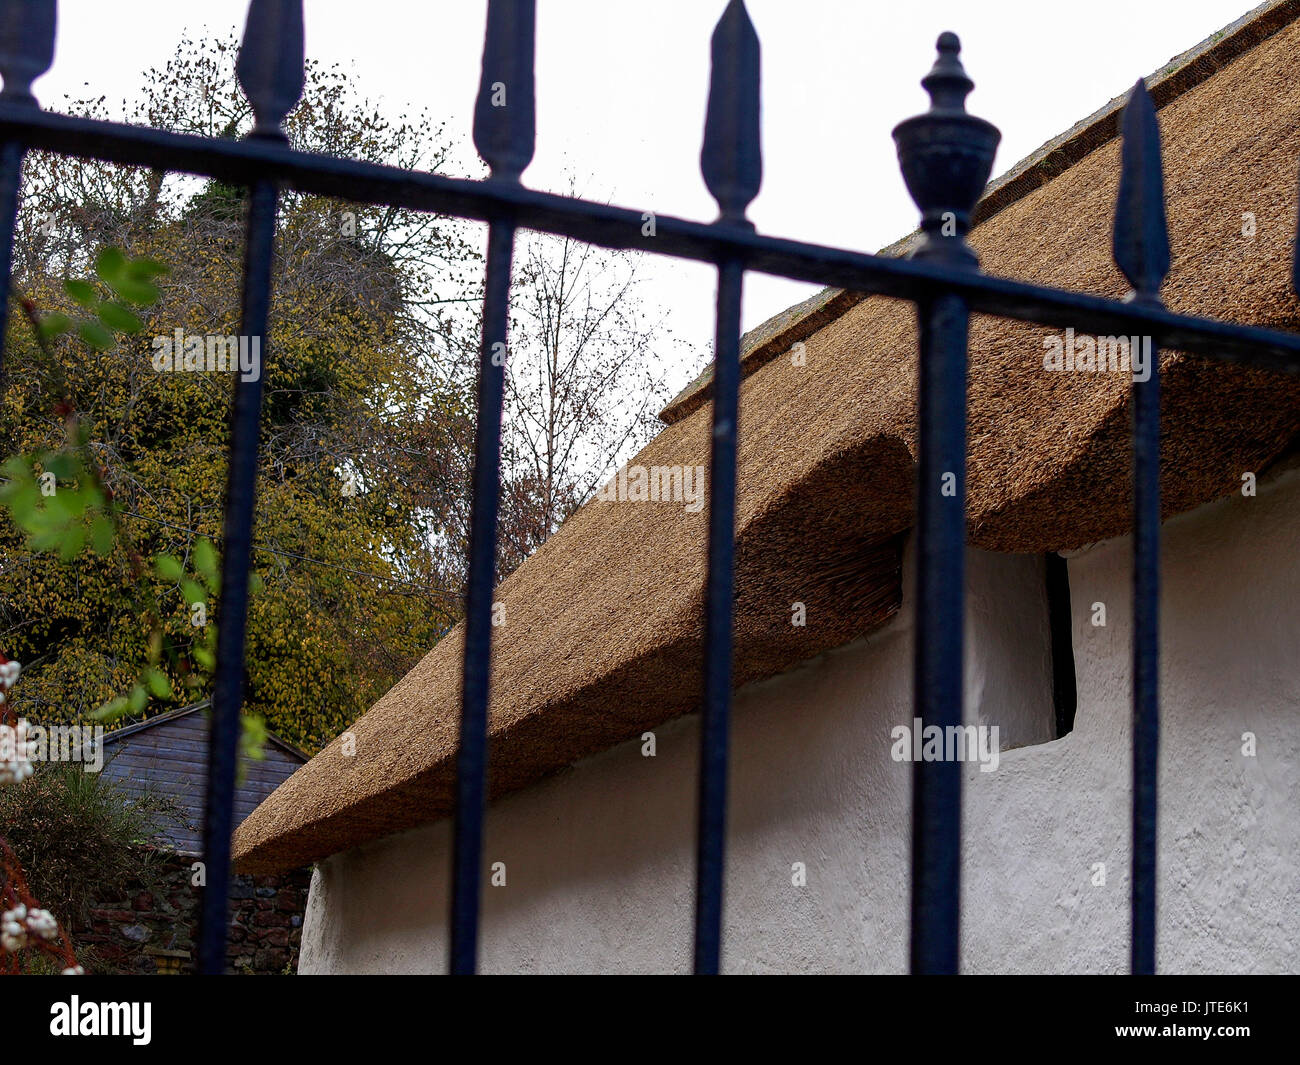 Thatched-Roof, Bars, Cottage, Greenery, Locked Out, Irons, No Entry, Locked Gate, Window Through the Bars, Secure, Trees, Keep Out, Blossom, Shed Stock Photo